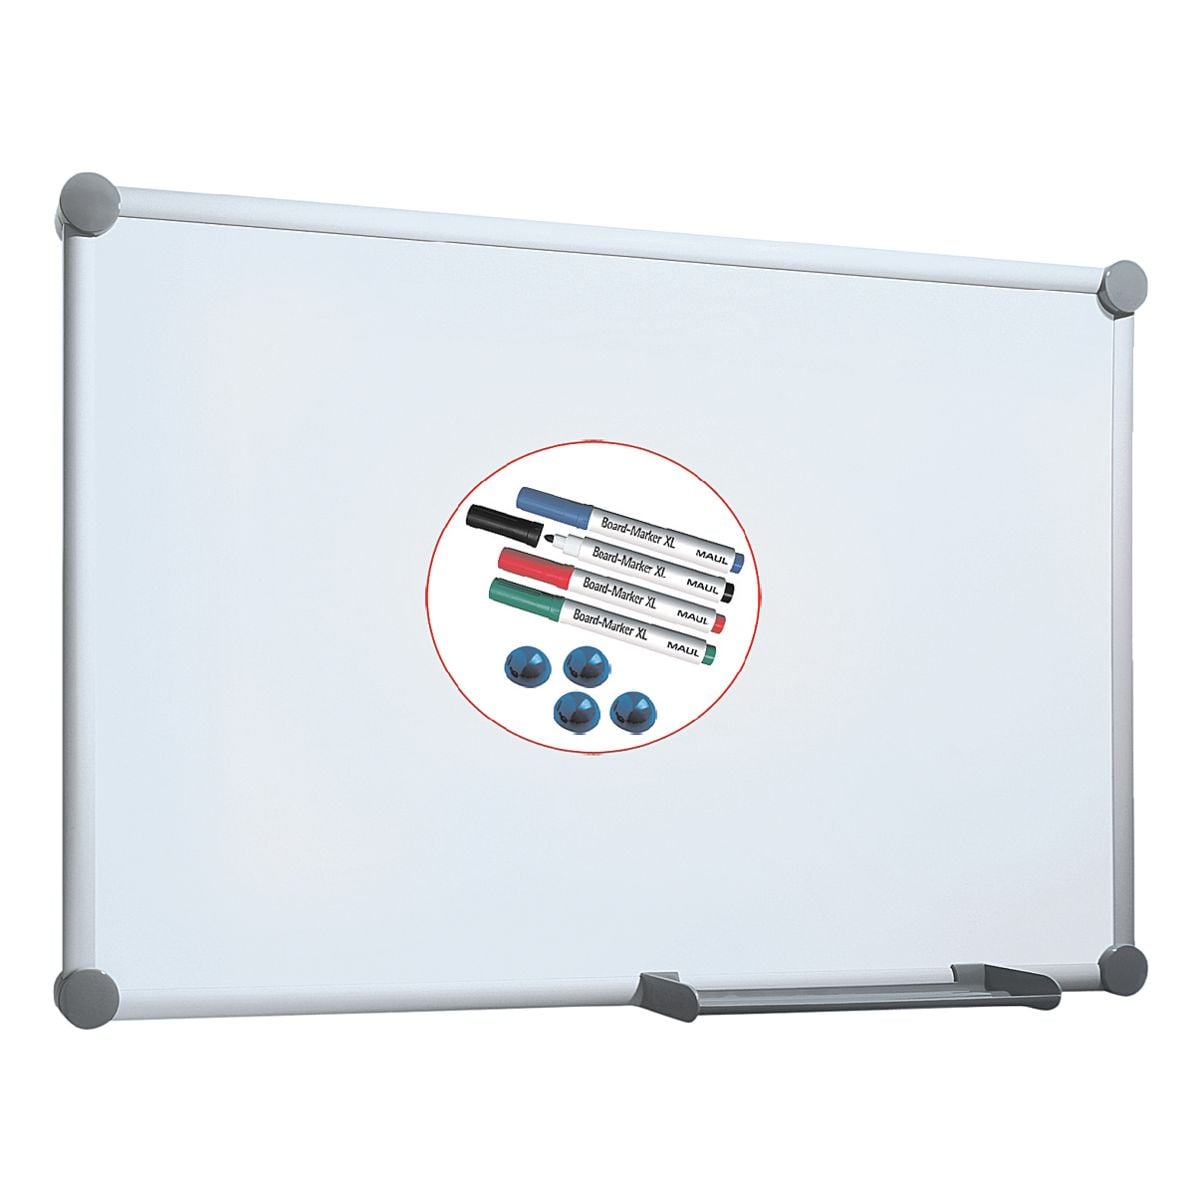 Maul Whiteboard 2000 Maulpro 6304184 emailliert, 180x90 cm